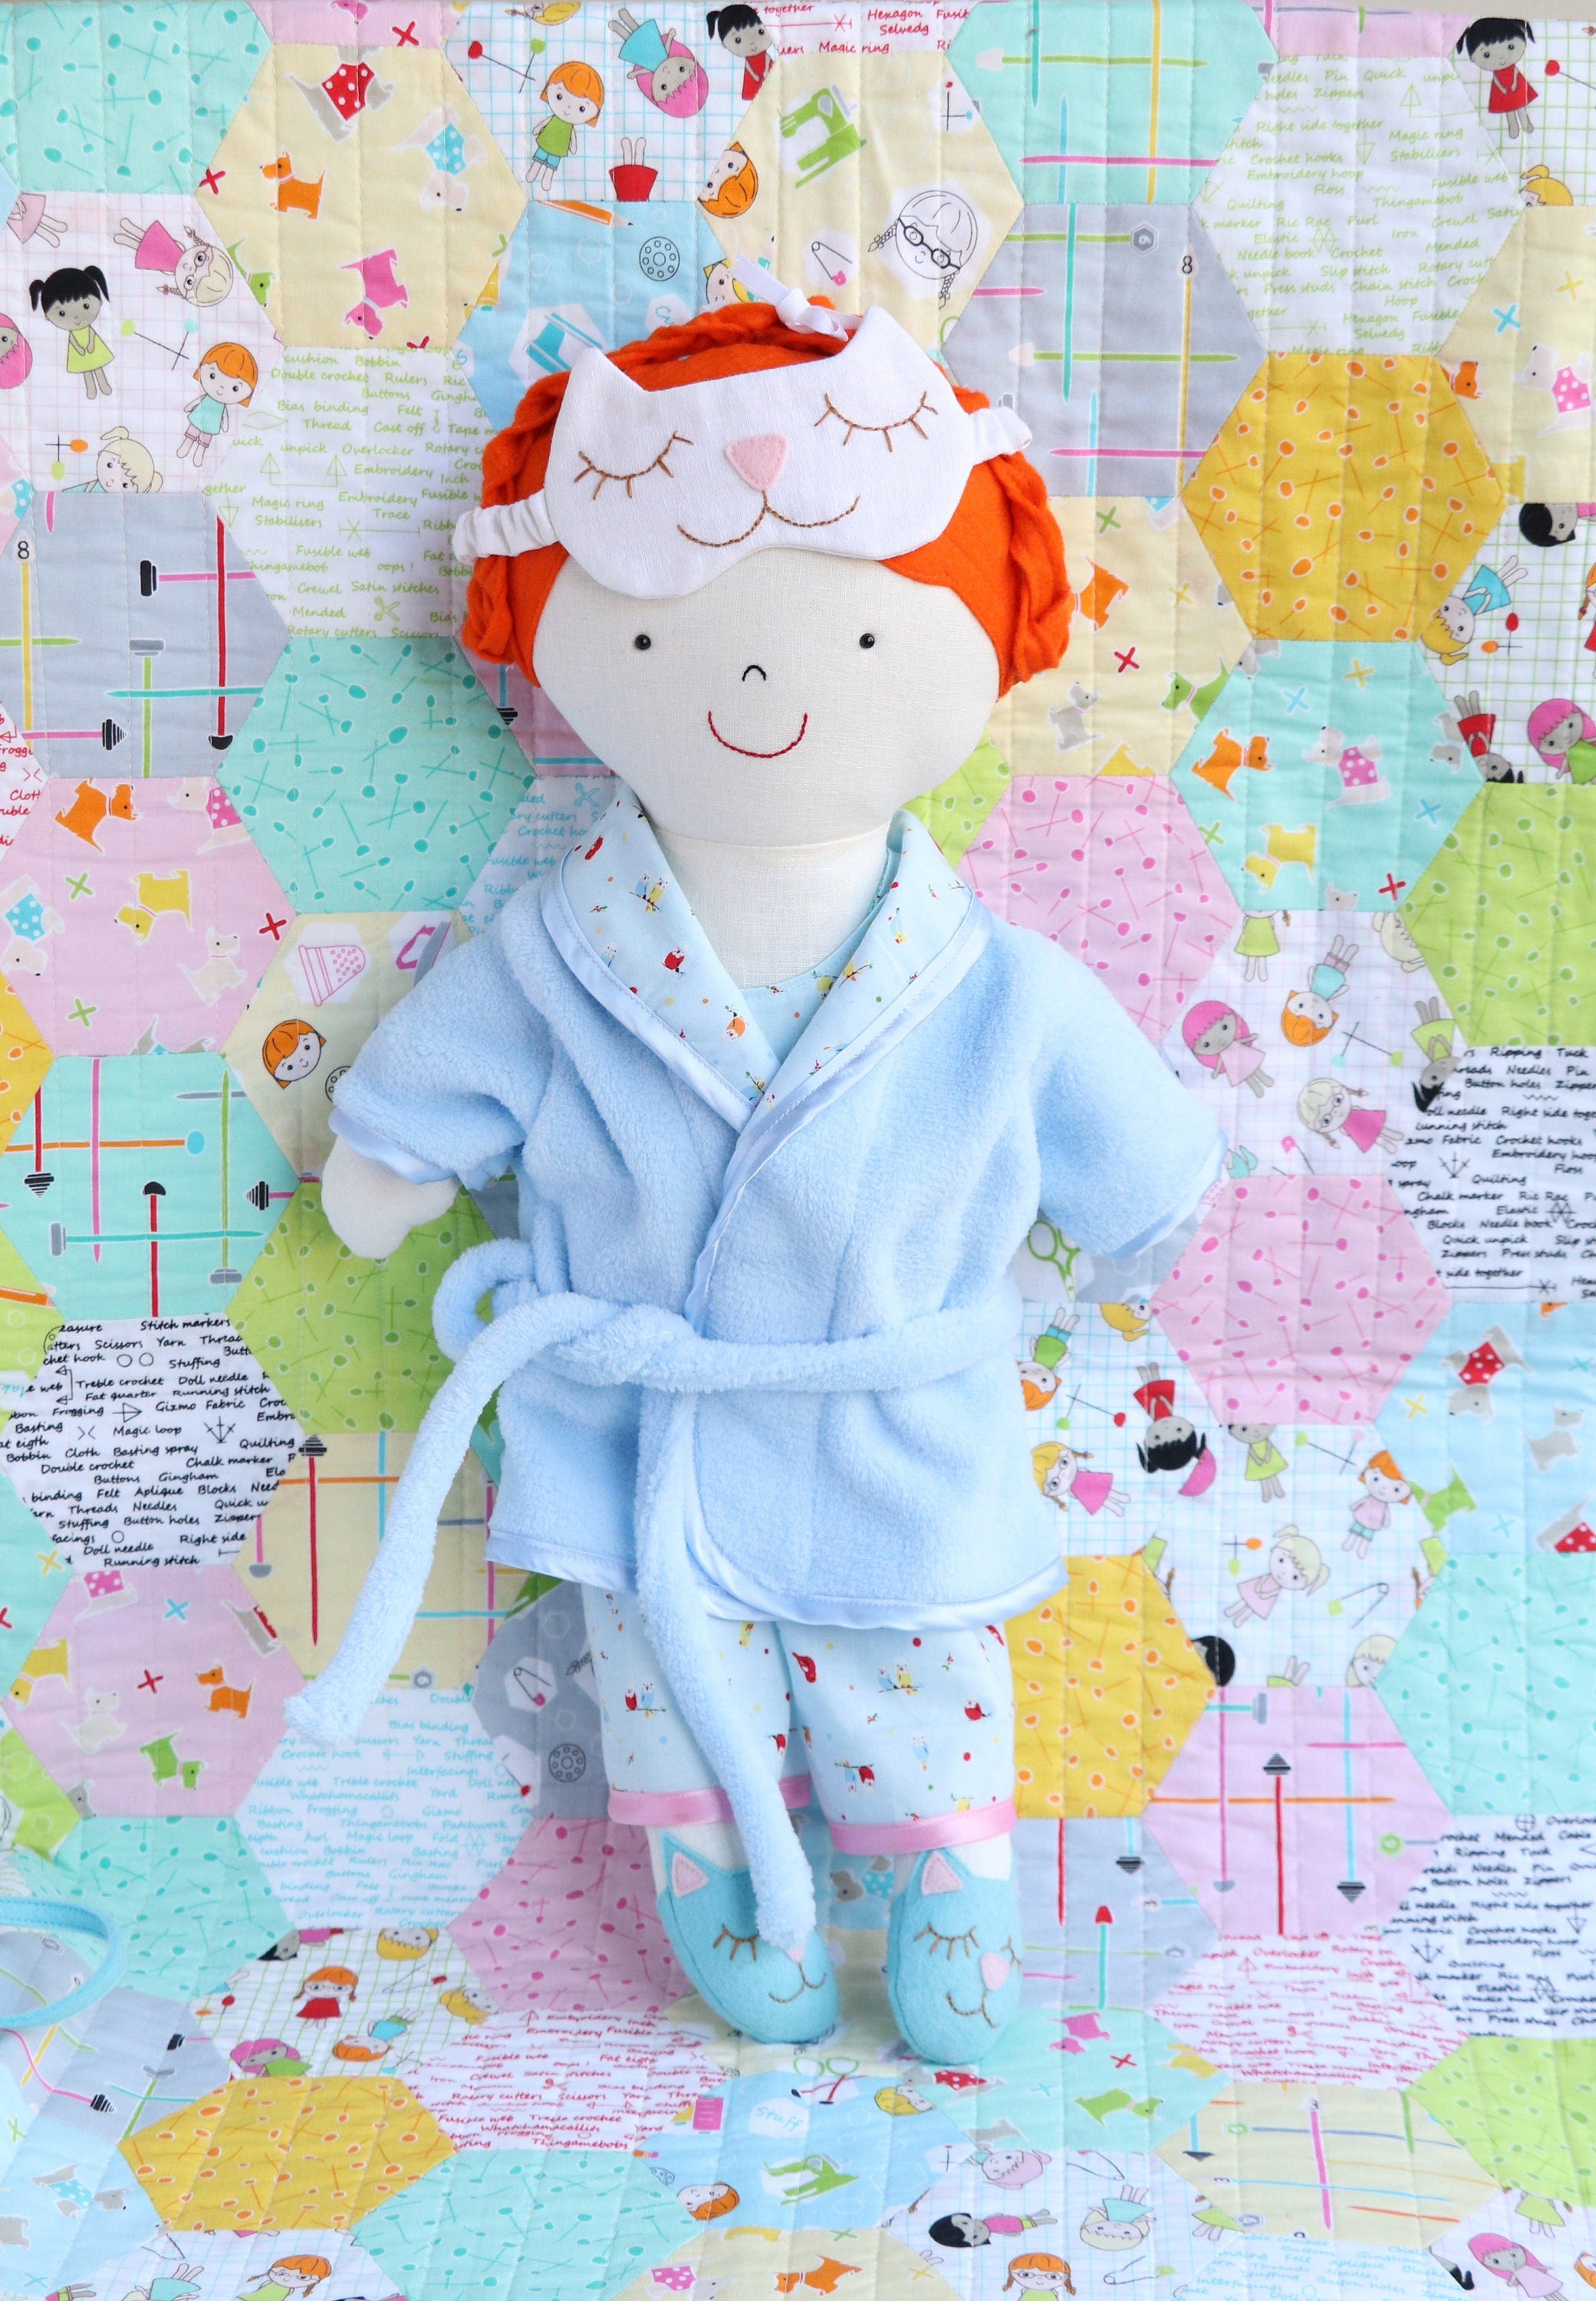 cloth doll with red hair wearing blue pyjamas and dressing gown. Doll is wearing a kitty shaped sleep mask